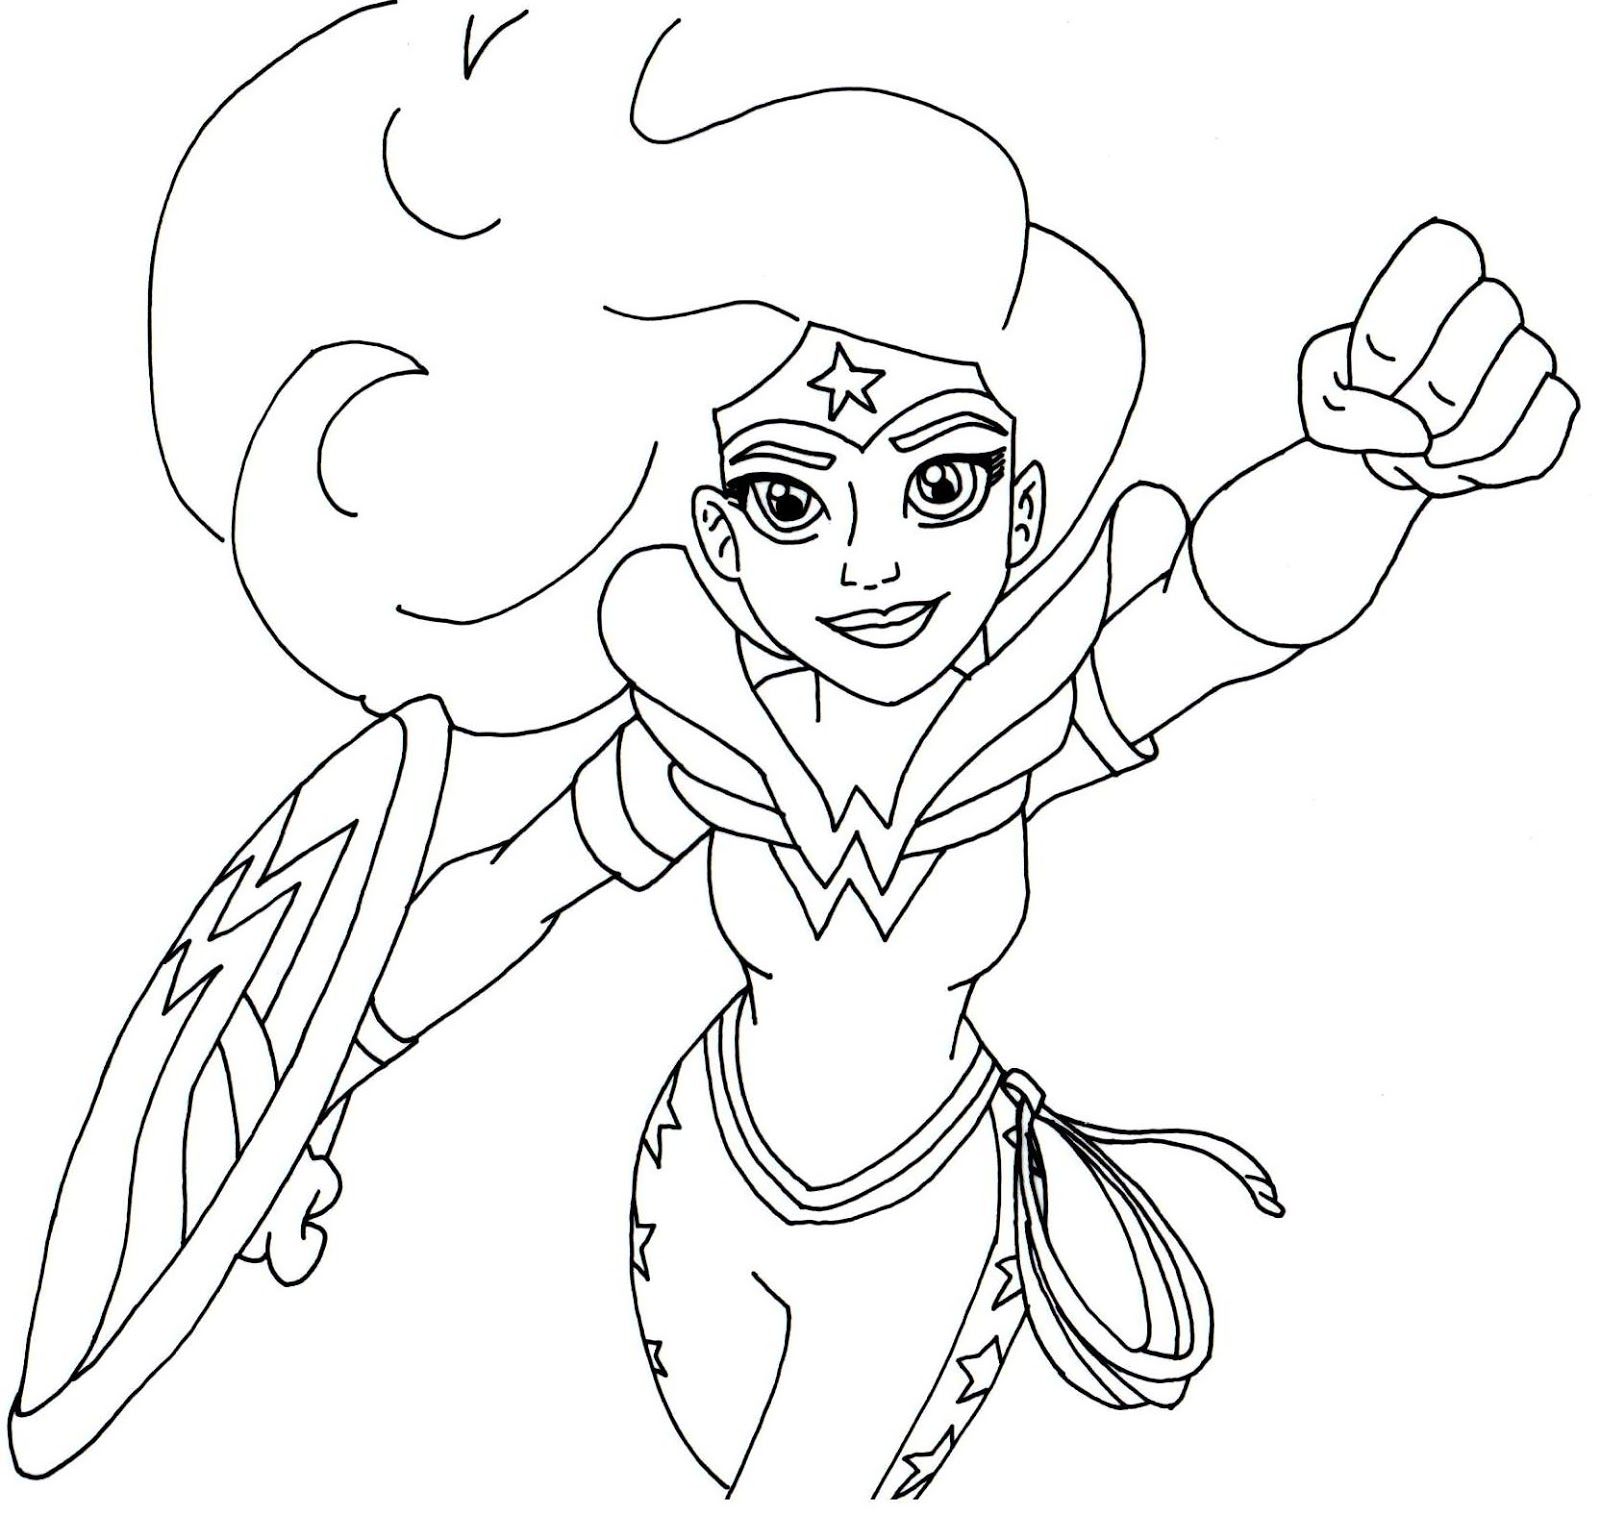 dc-superhero-girls-coloring-pages-best-coloring-pages-for-kids